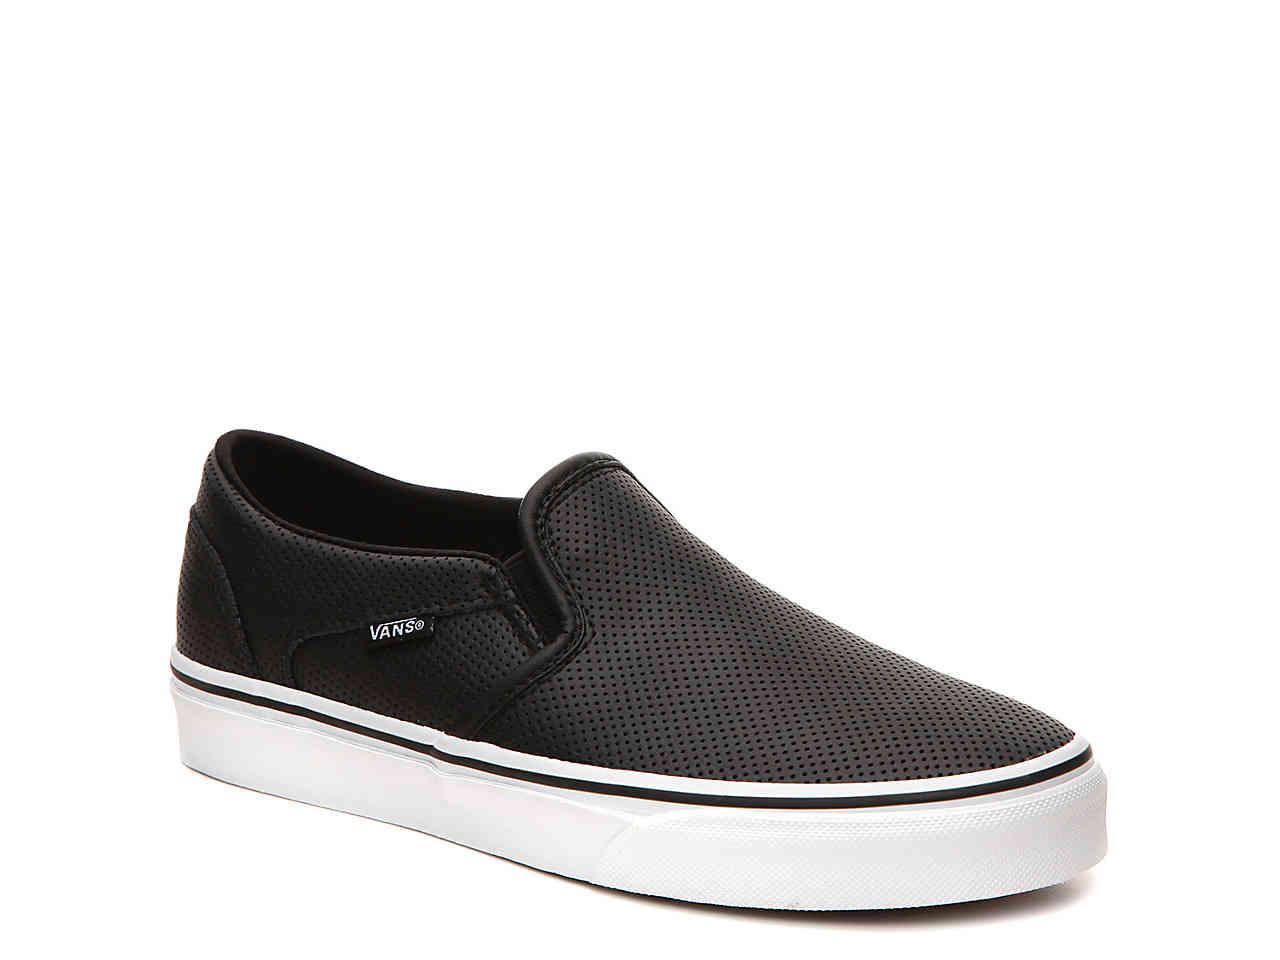 Vans Leather Asher Perforated Slip-on Sneaker in Black - Lyst